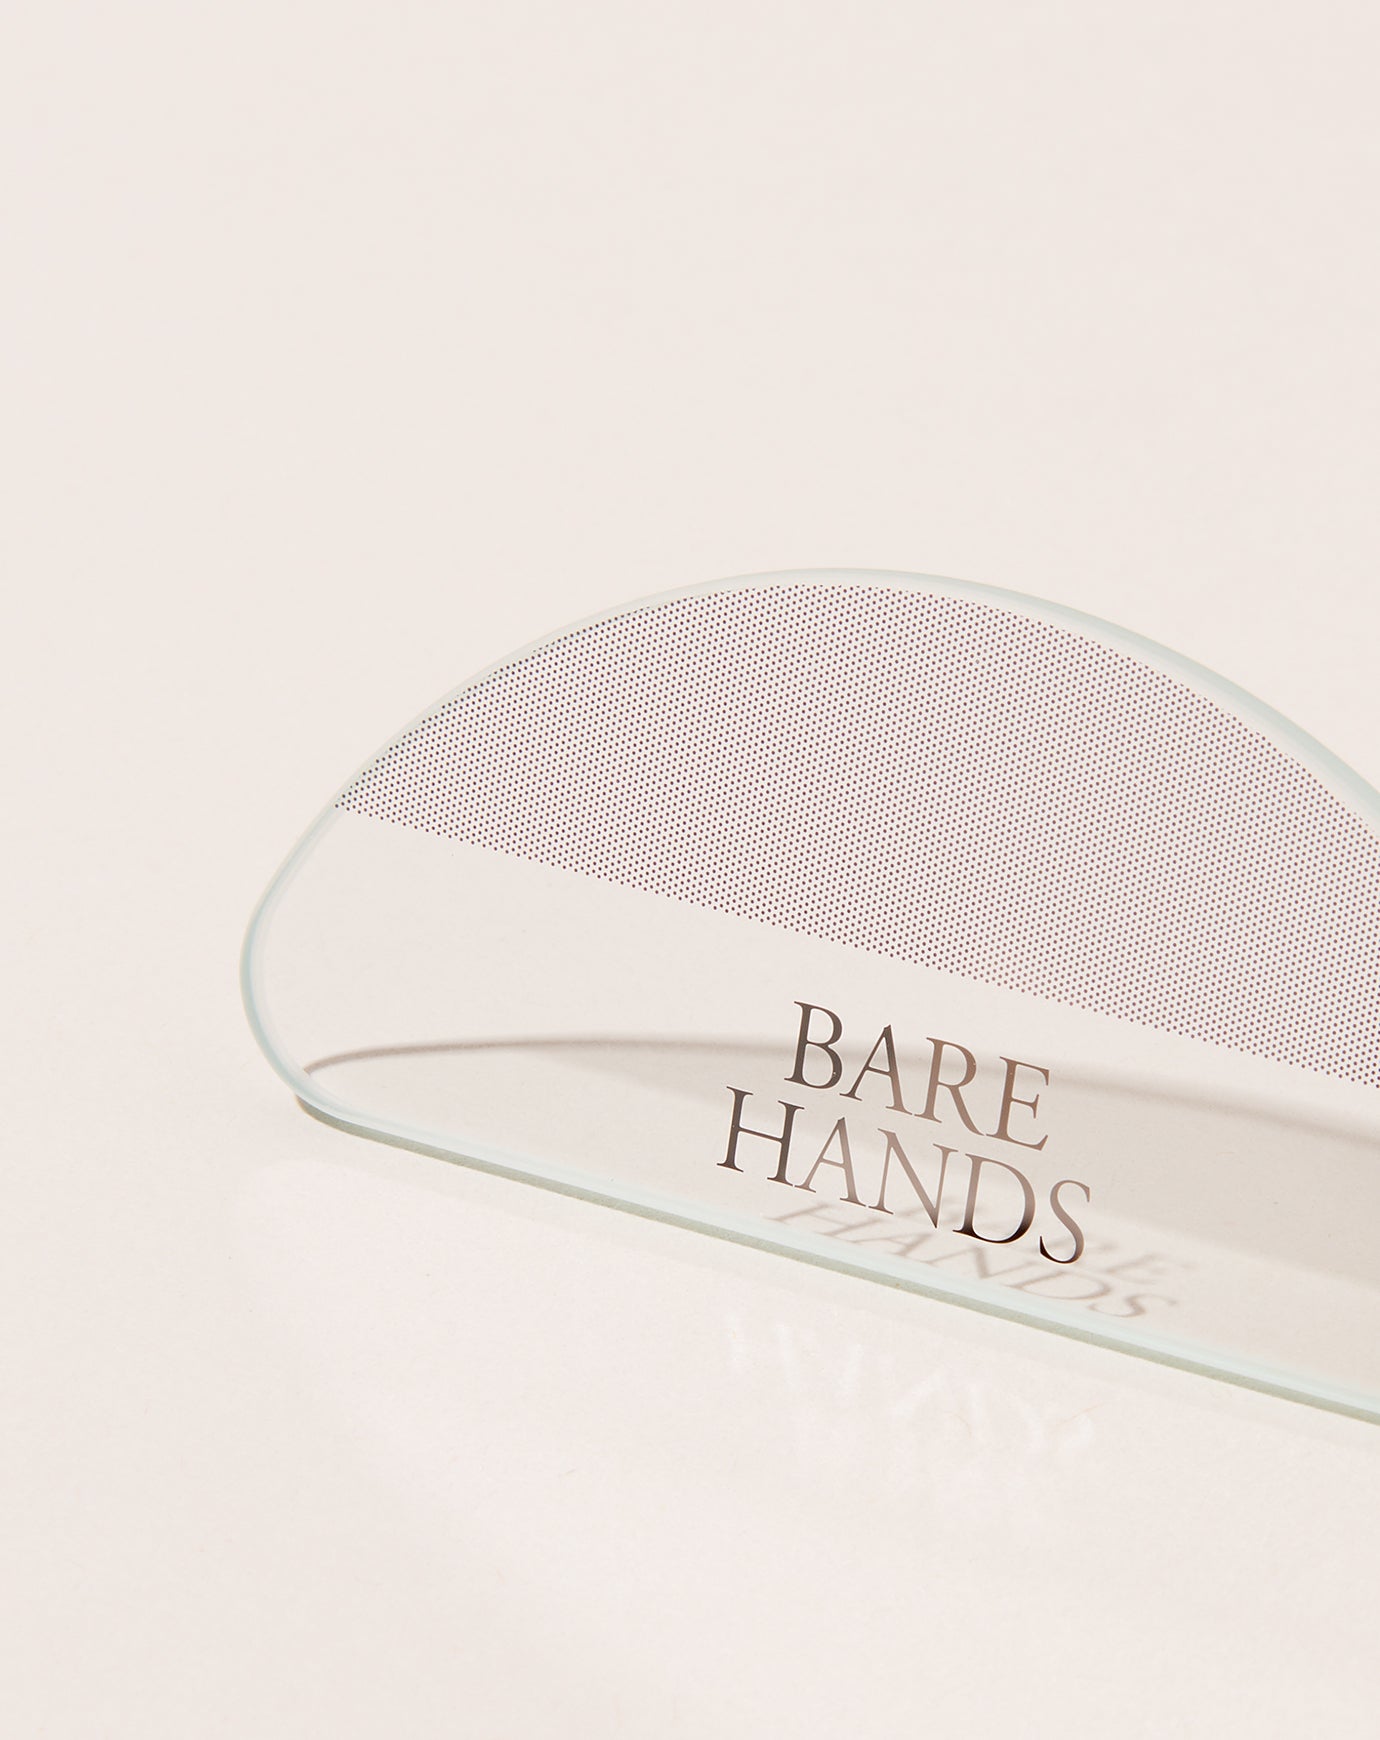 Bare Hands The Dry Gloss Manicure Kit in Unscented